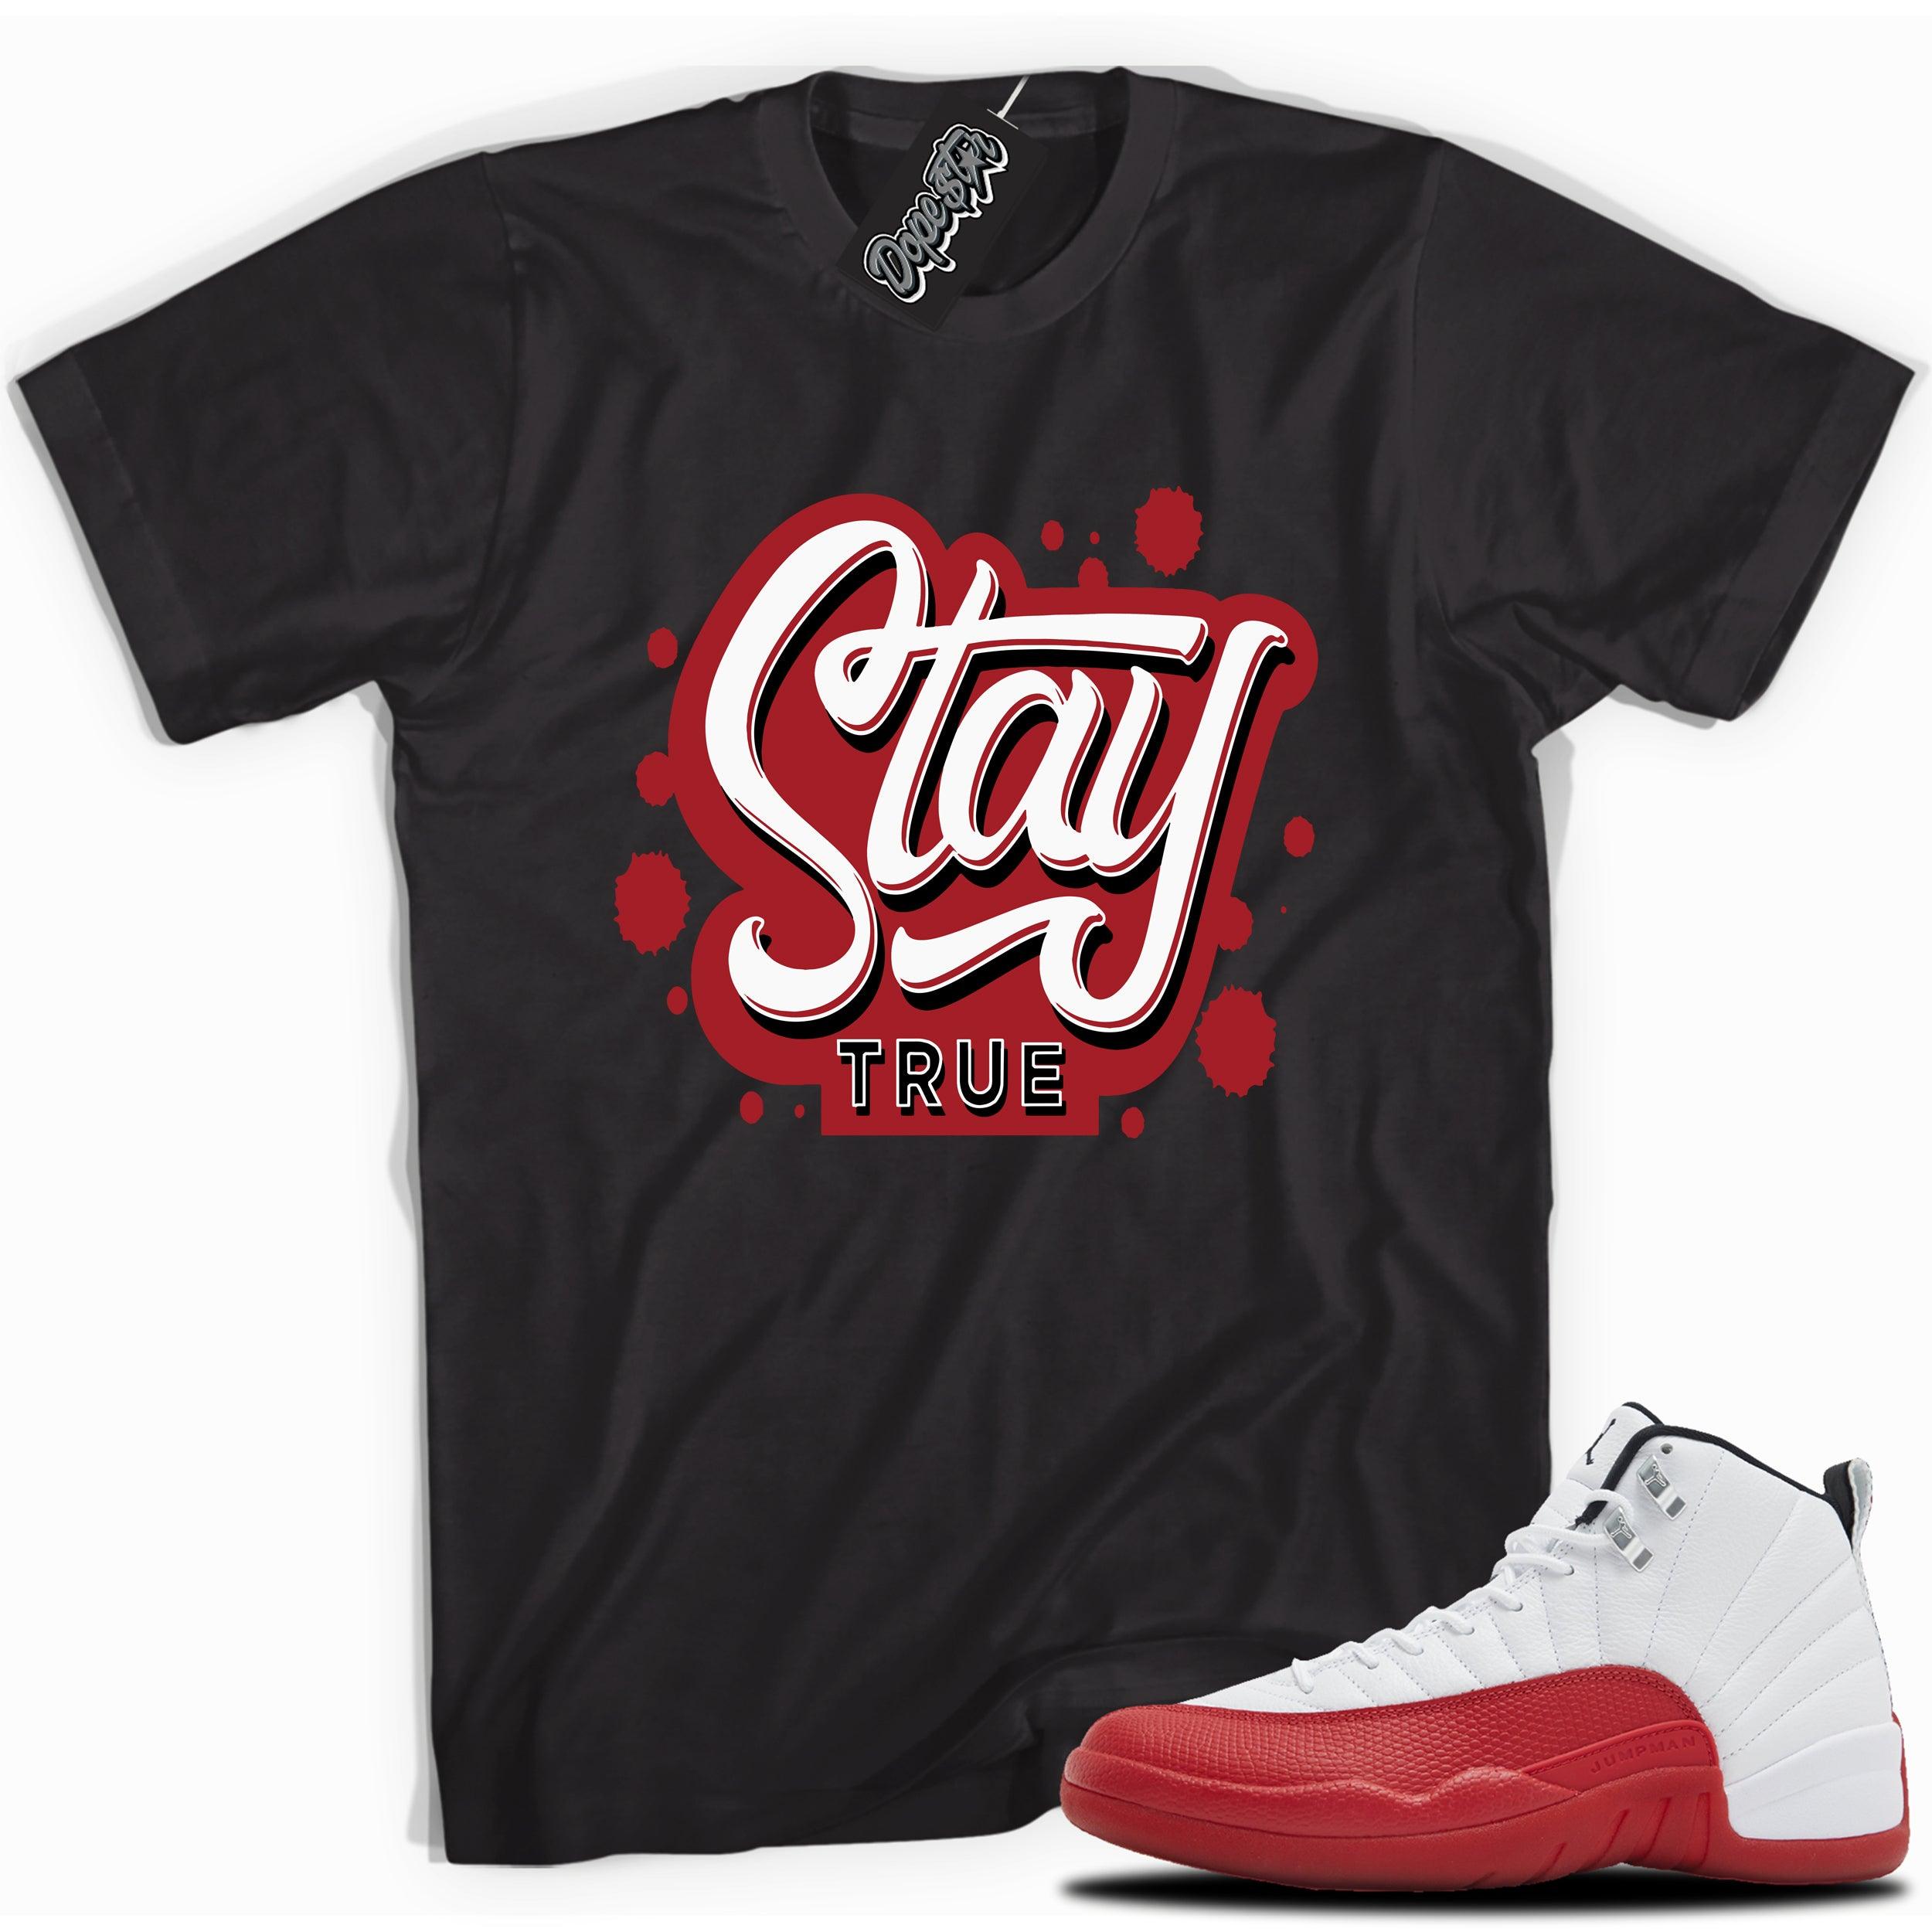 Cool Black graphic tee with “Stay True” print, that perfectly matches Air Jordan 12 Retro Cherry Red 2023 red and white sneakers 